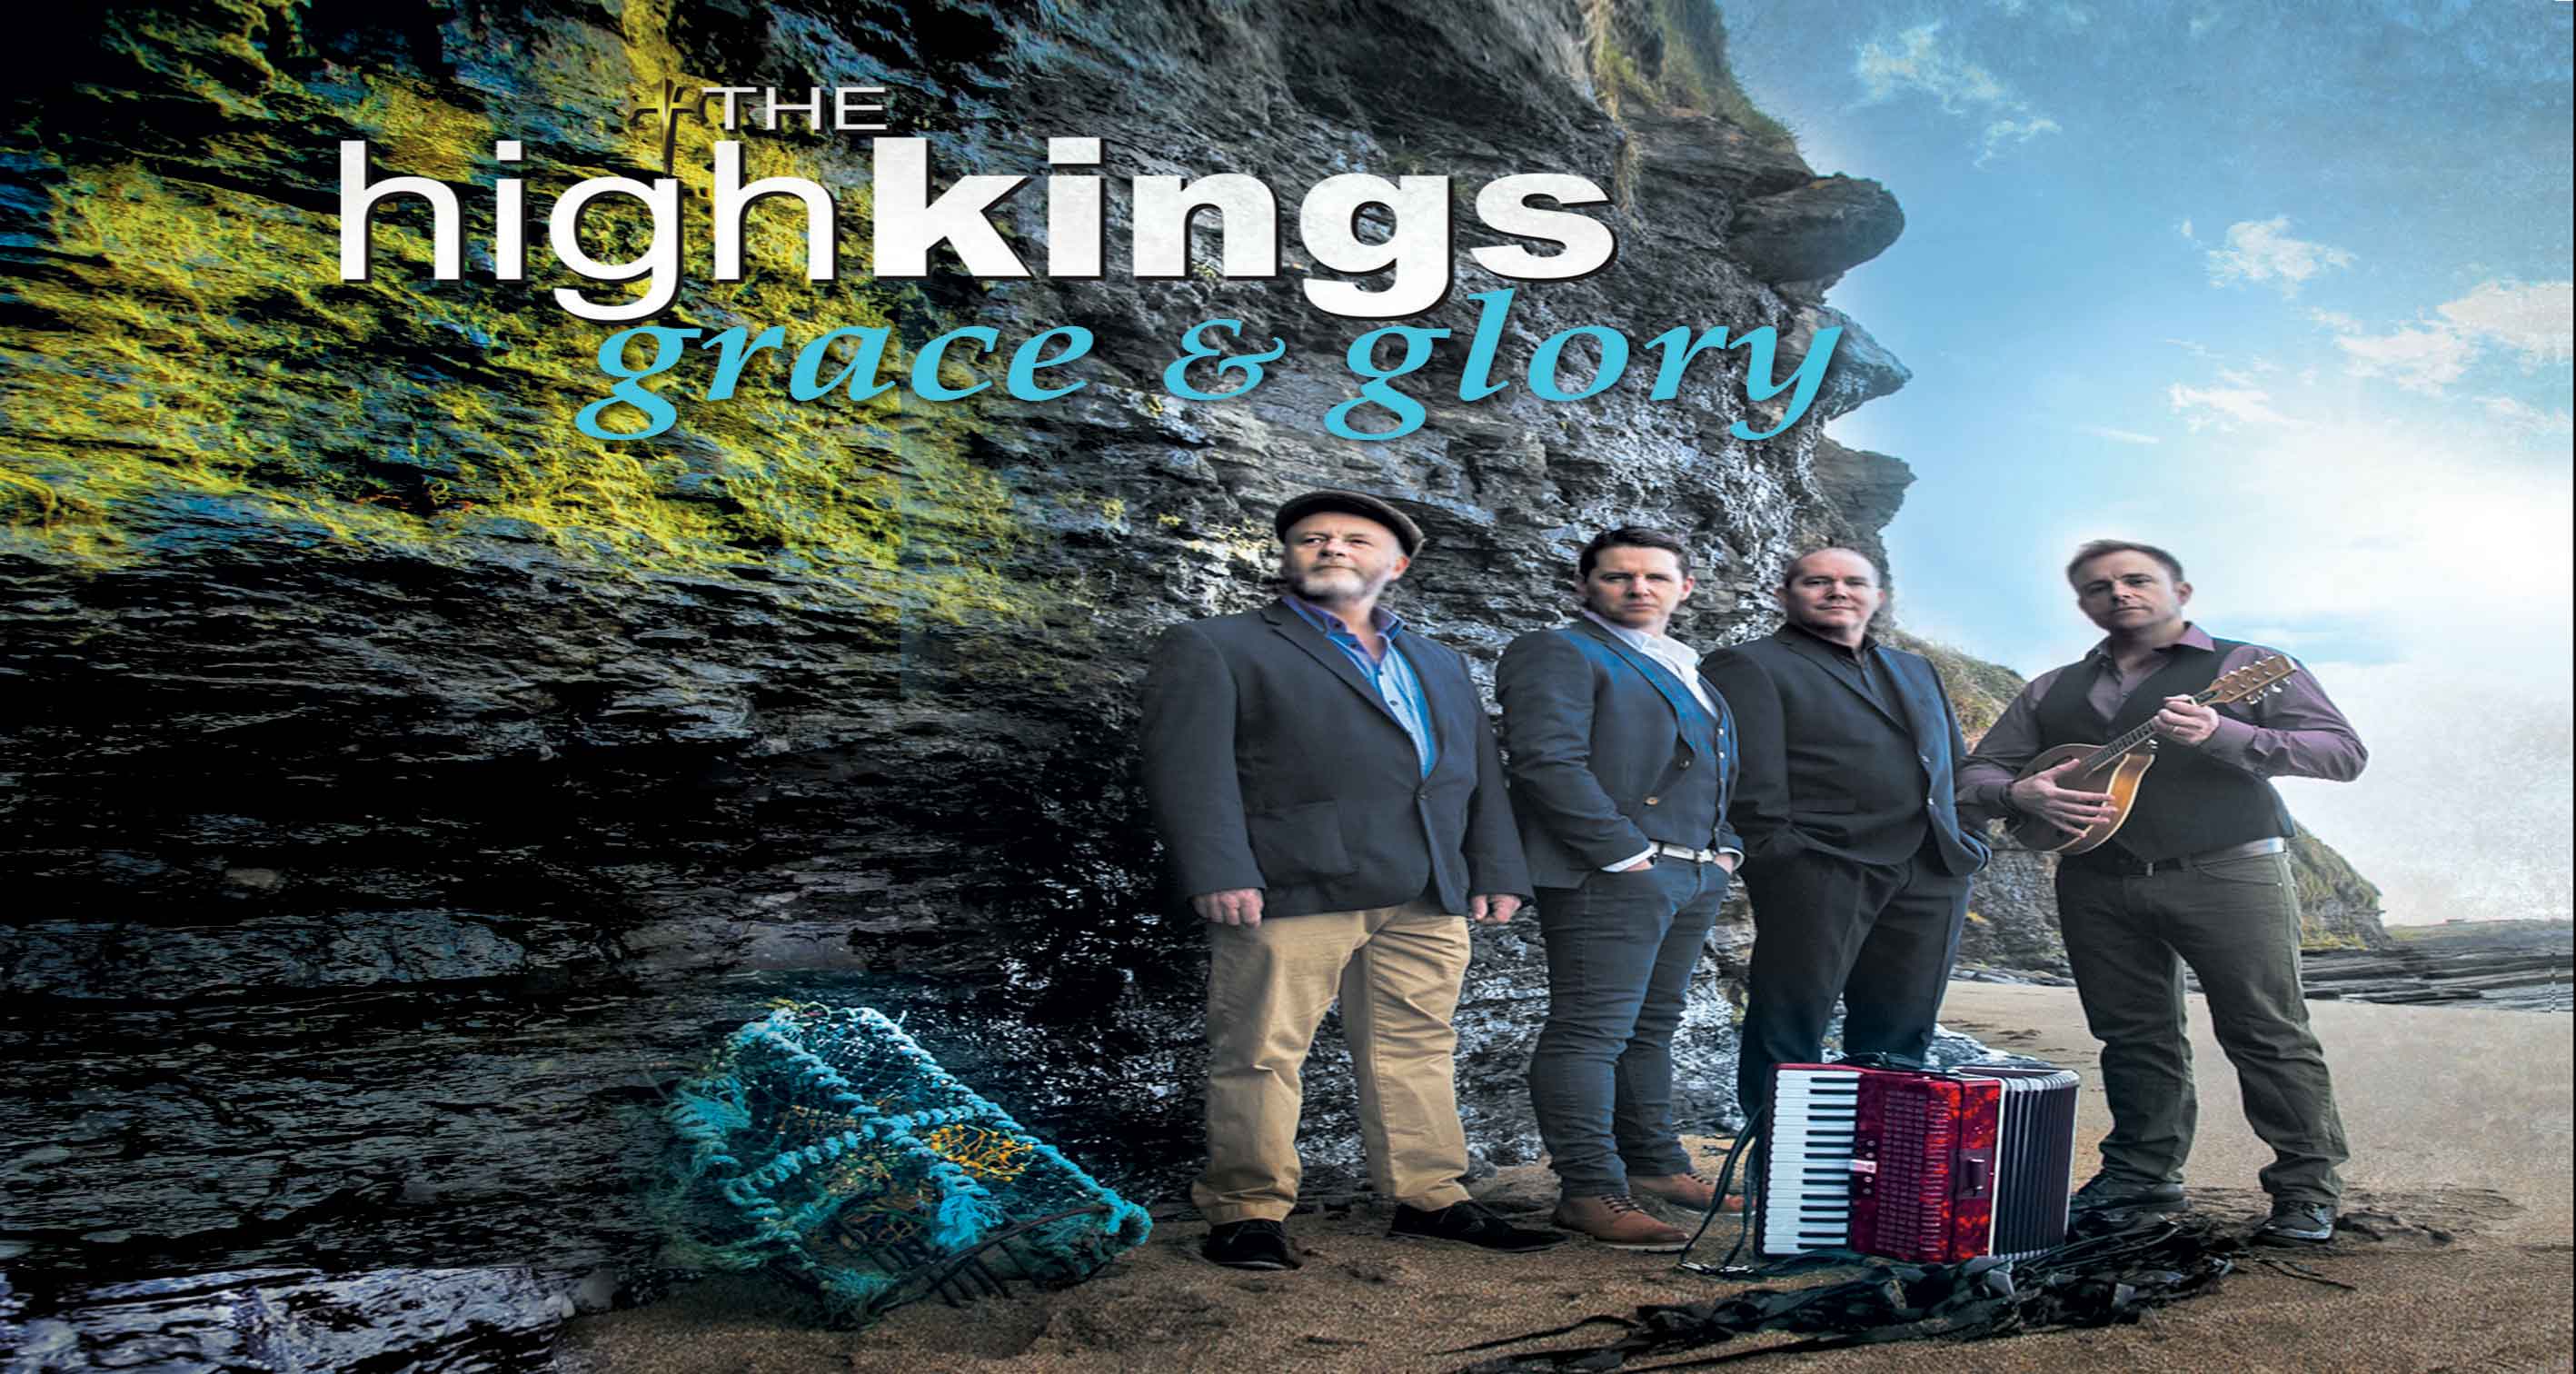 The High Kings - New Album Grace & Glory - Whats On South West